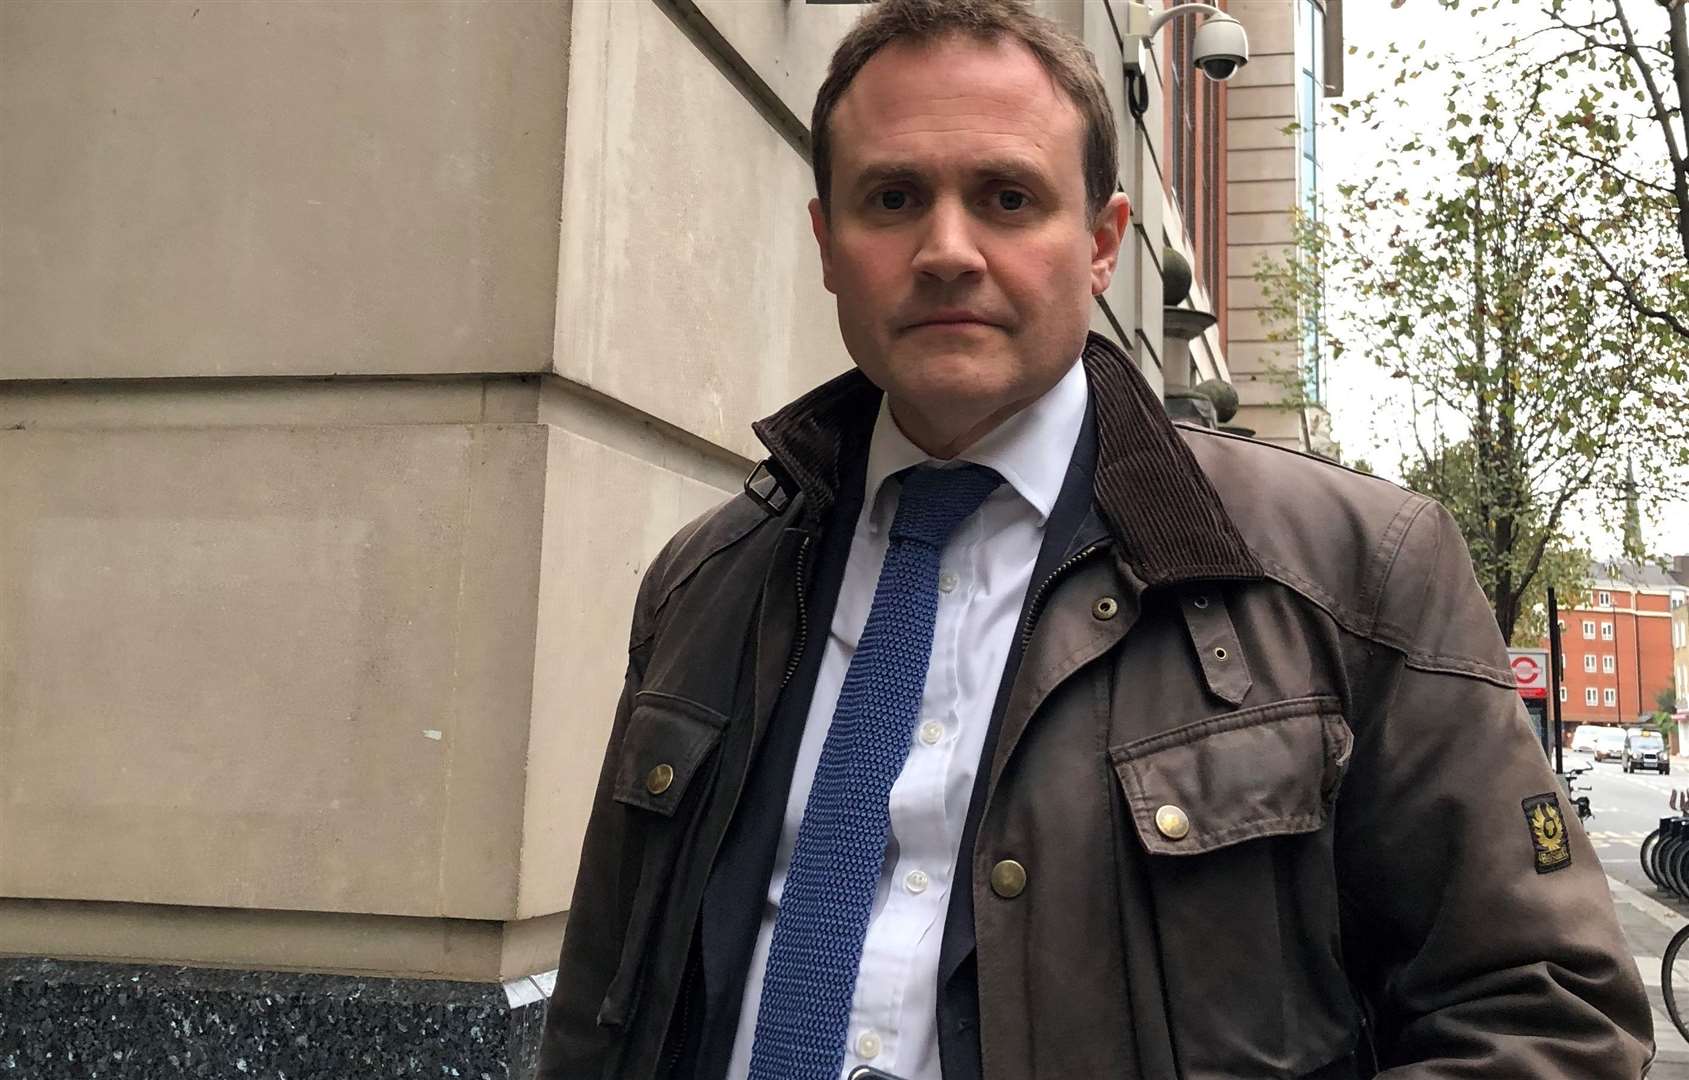 Tonbridge and Malling MP Tom Tugendhat says he is likely to stand if there is a leadership election